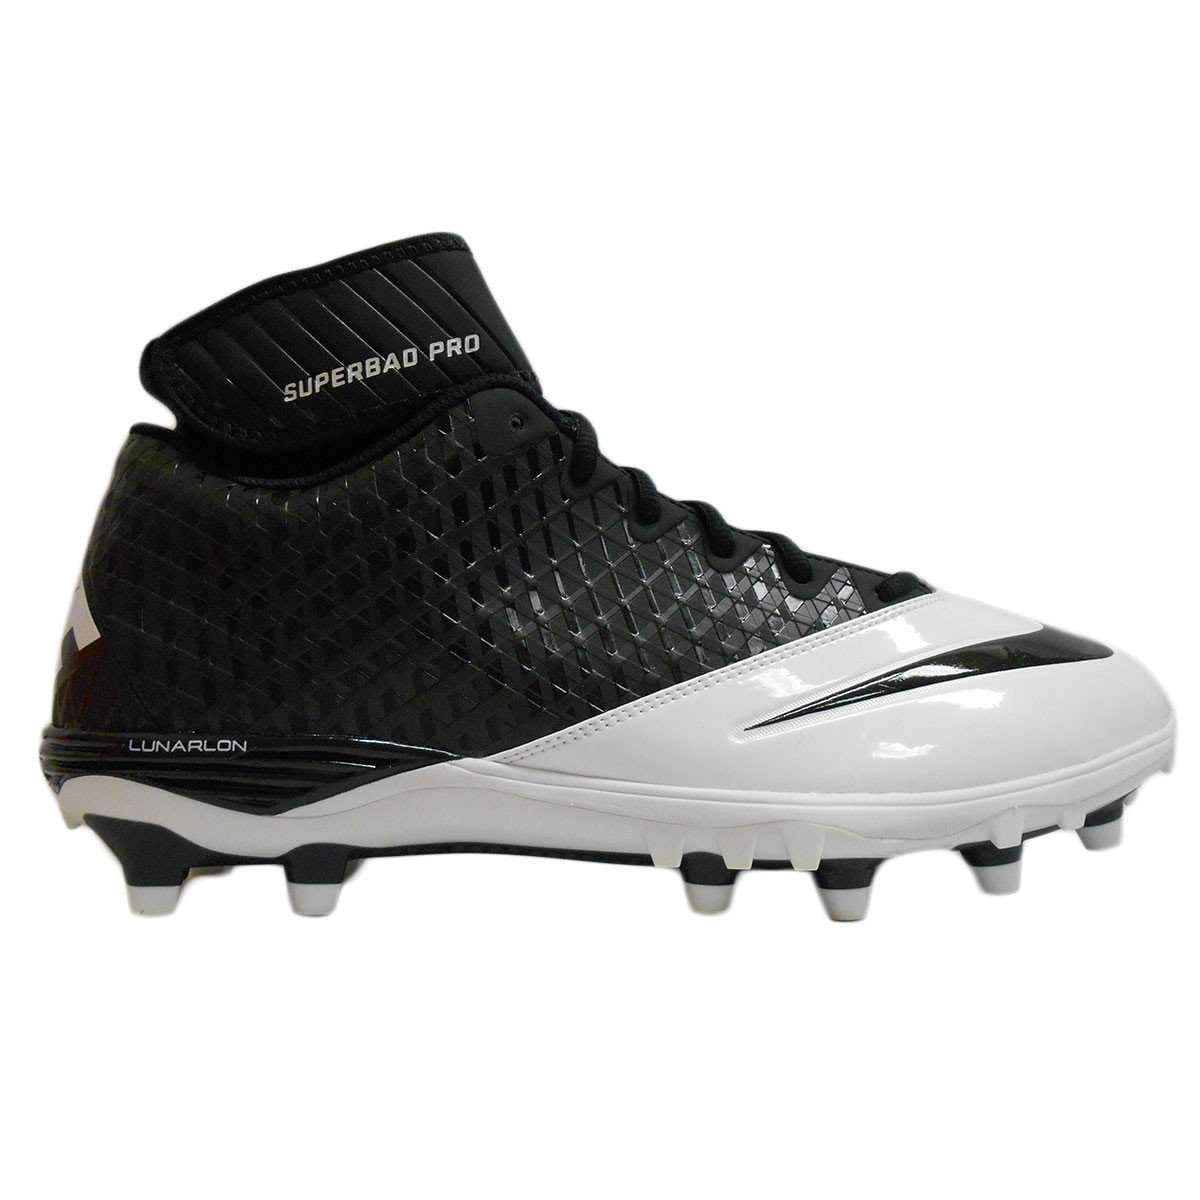 nike superbad pro football cleats online -